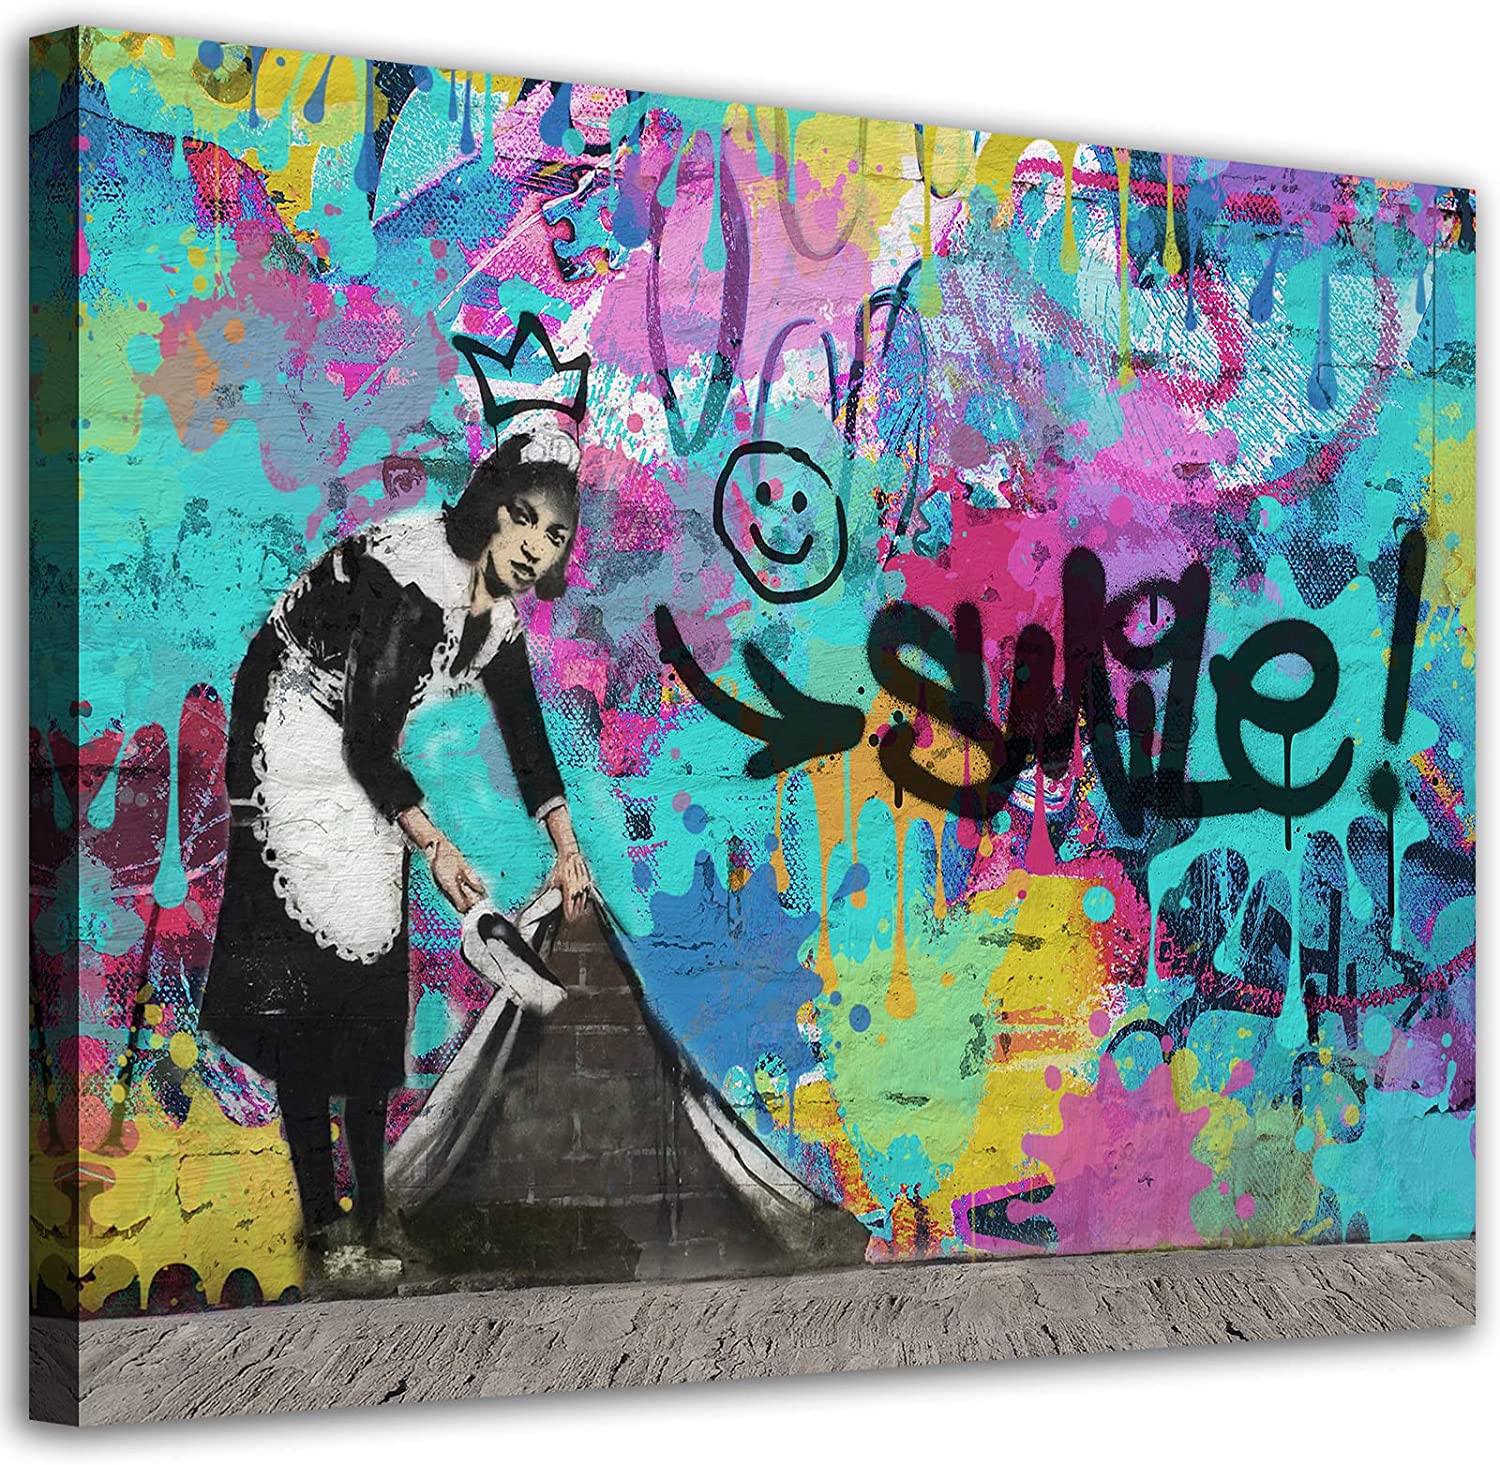 Banksy Canvas Wall Art Maid Sweeping Under the Carpet Art Print Graffiti  Street Pop Culture Canvas Pictures Colorful Graffiti Smile Face Canvas  Artwork Living Room Bedroom Bathroom Wall Decor 12x16in